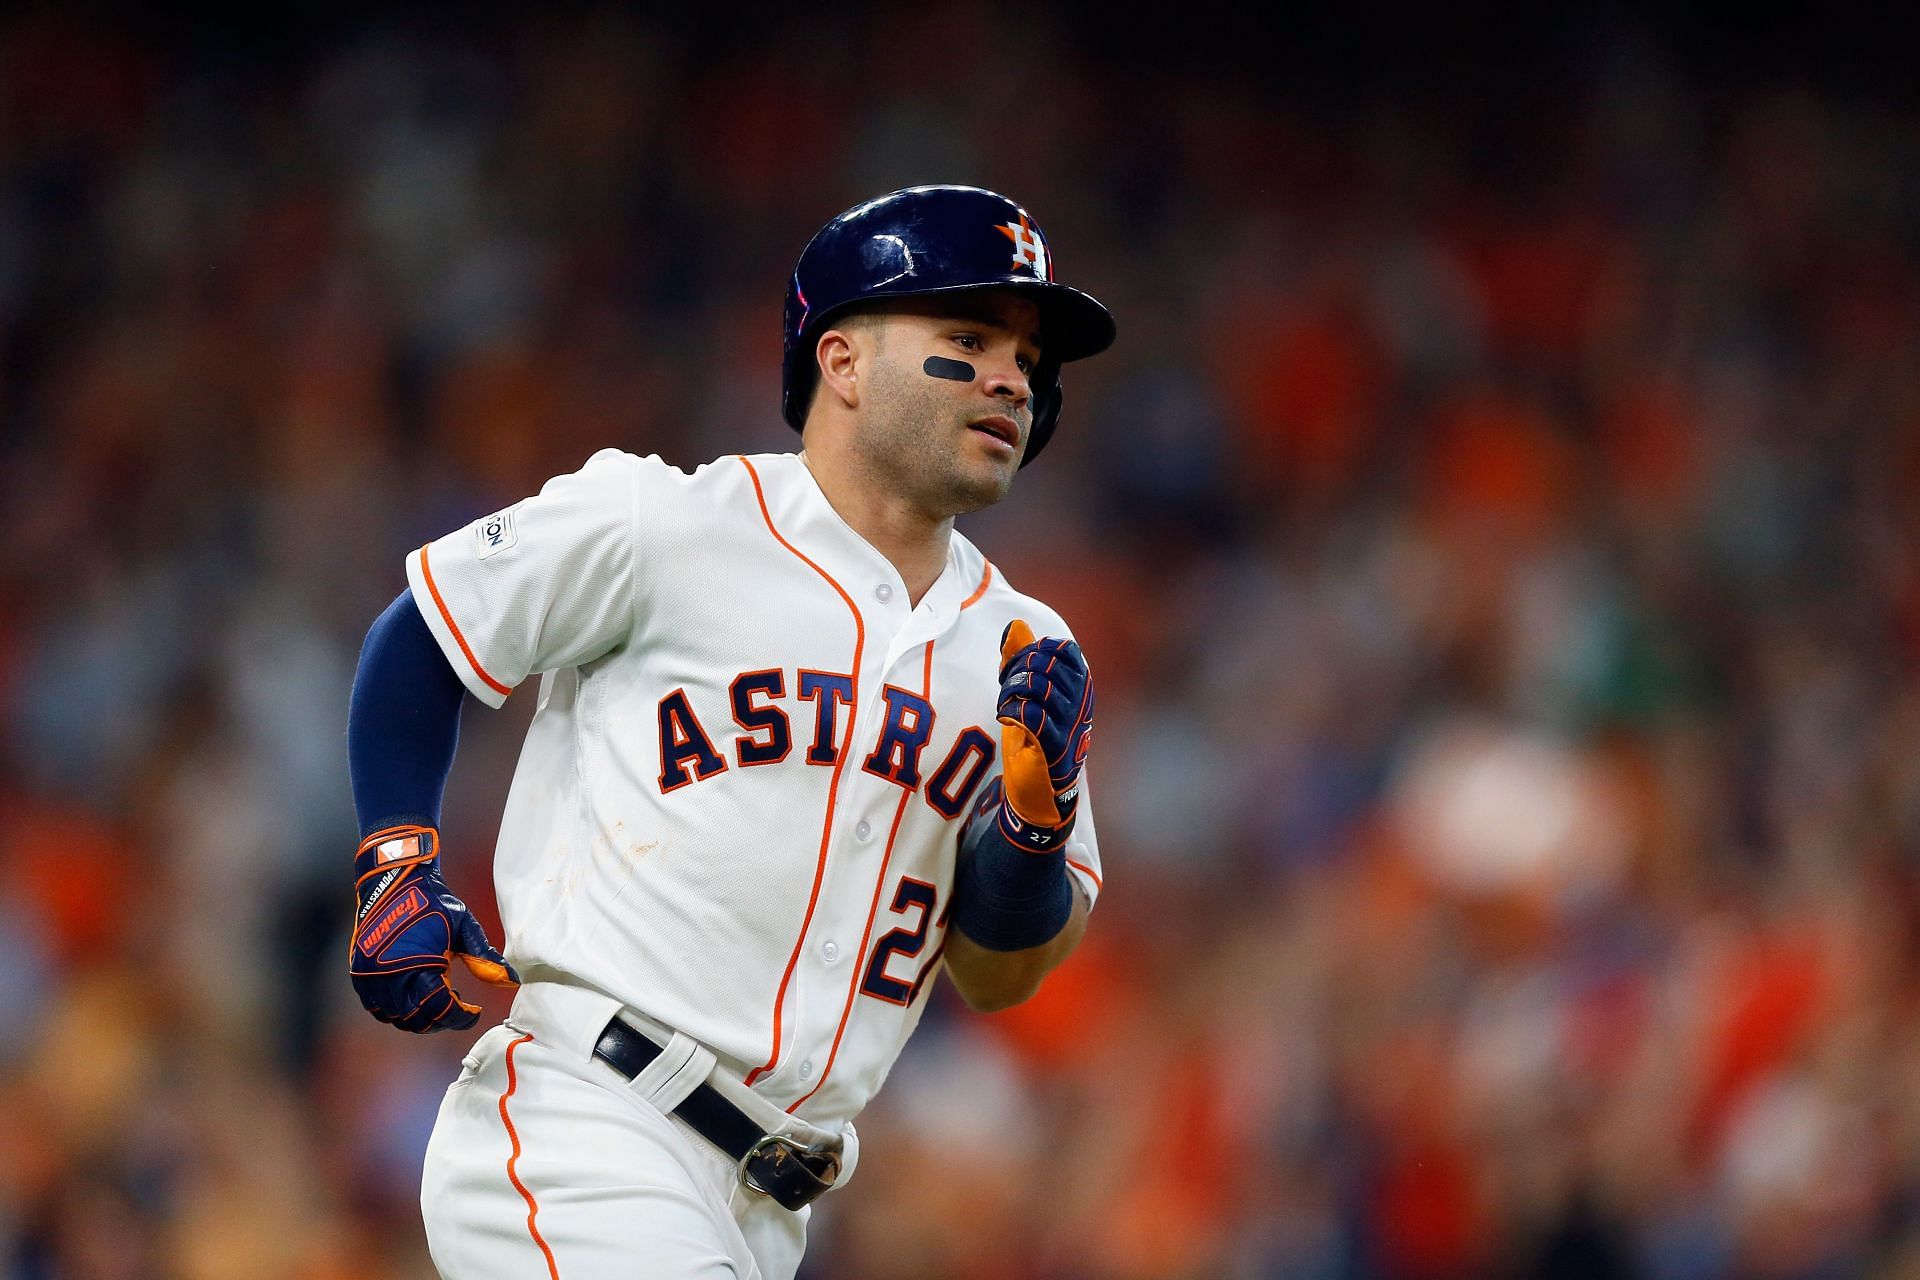 Houston Astros star Jose Altuve is among the best of his generation